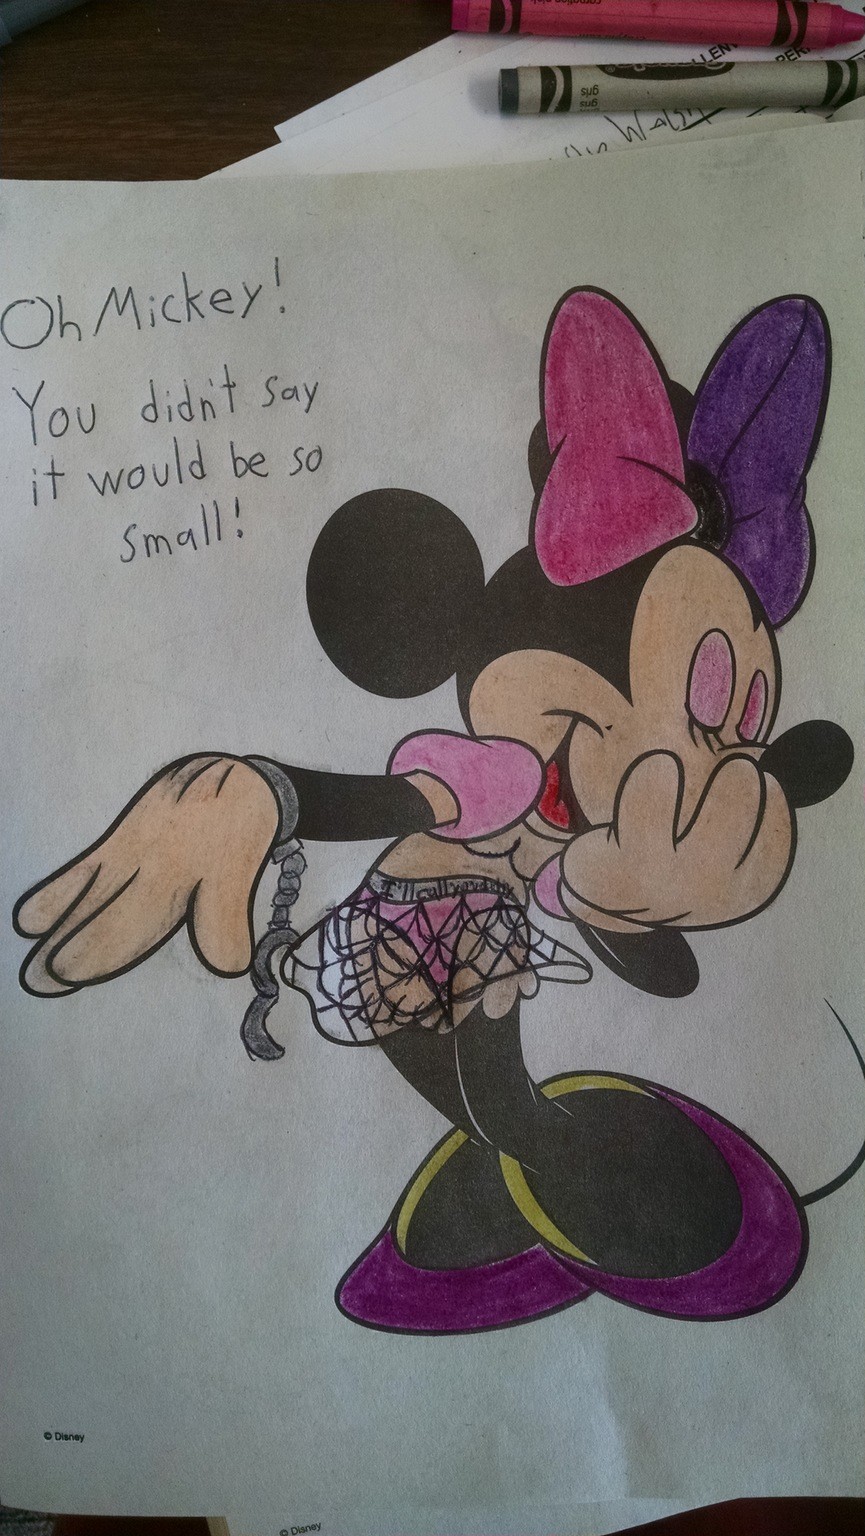 Coloring book - Sub SU6 \ Oh Mickey! You didn't say it would be so Small! Disney Disney